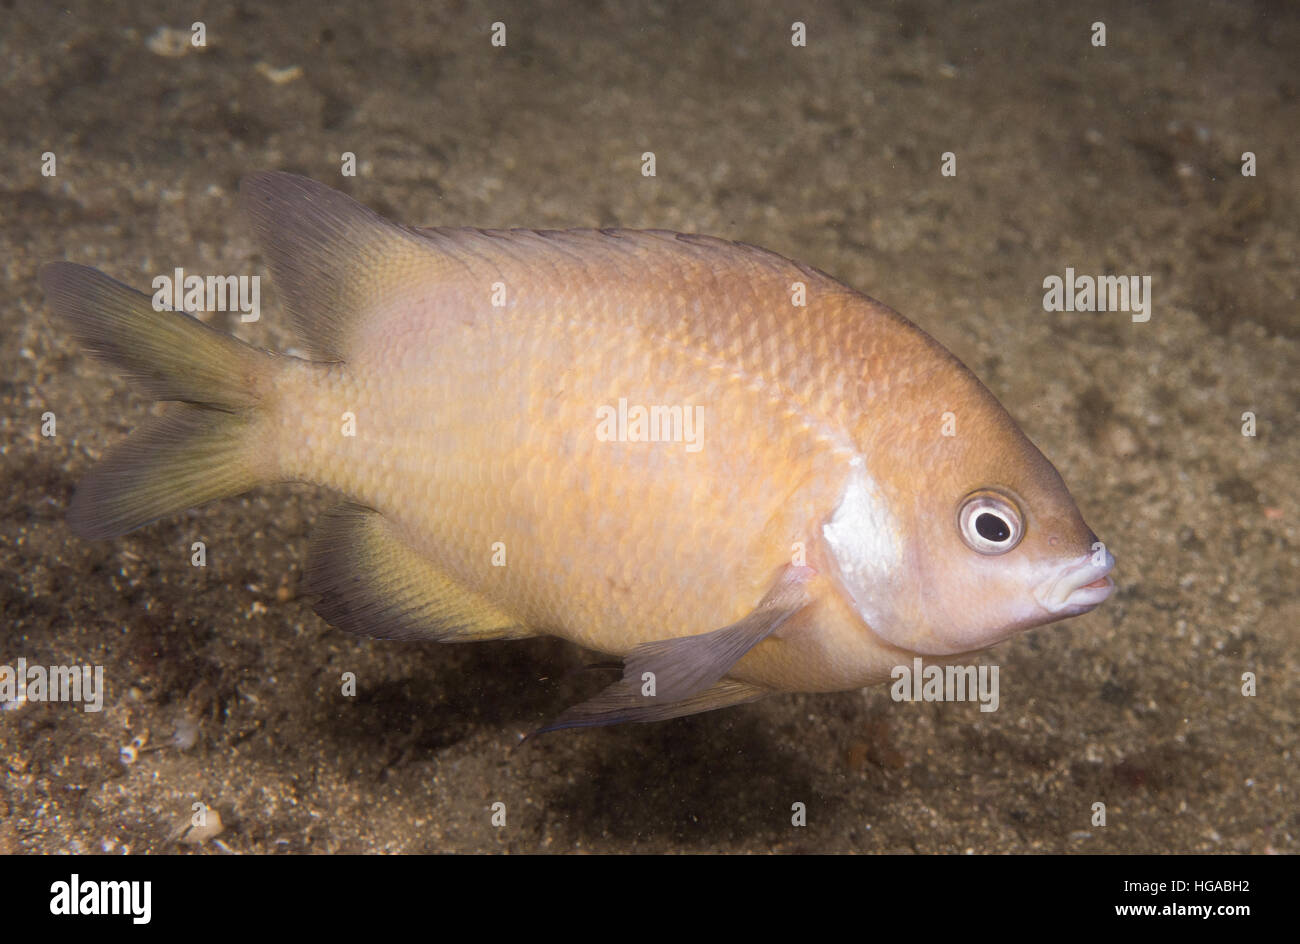 White-Ohr Parma (Parma Microlepis), Bare Island, Botany Bay, New South Wales, Australien Stockfoto